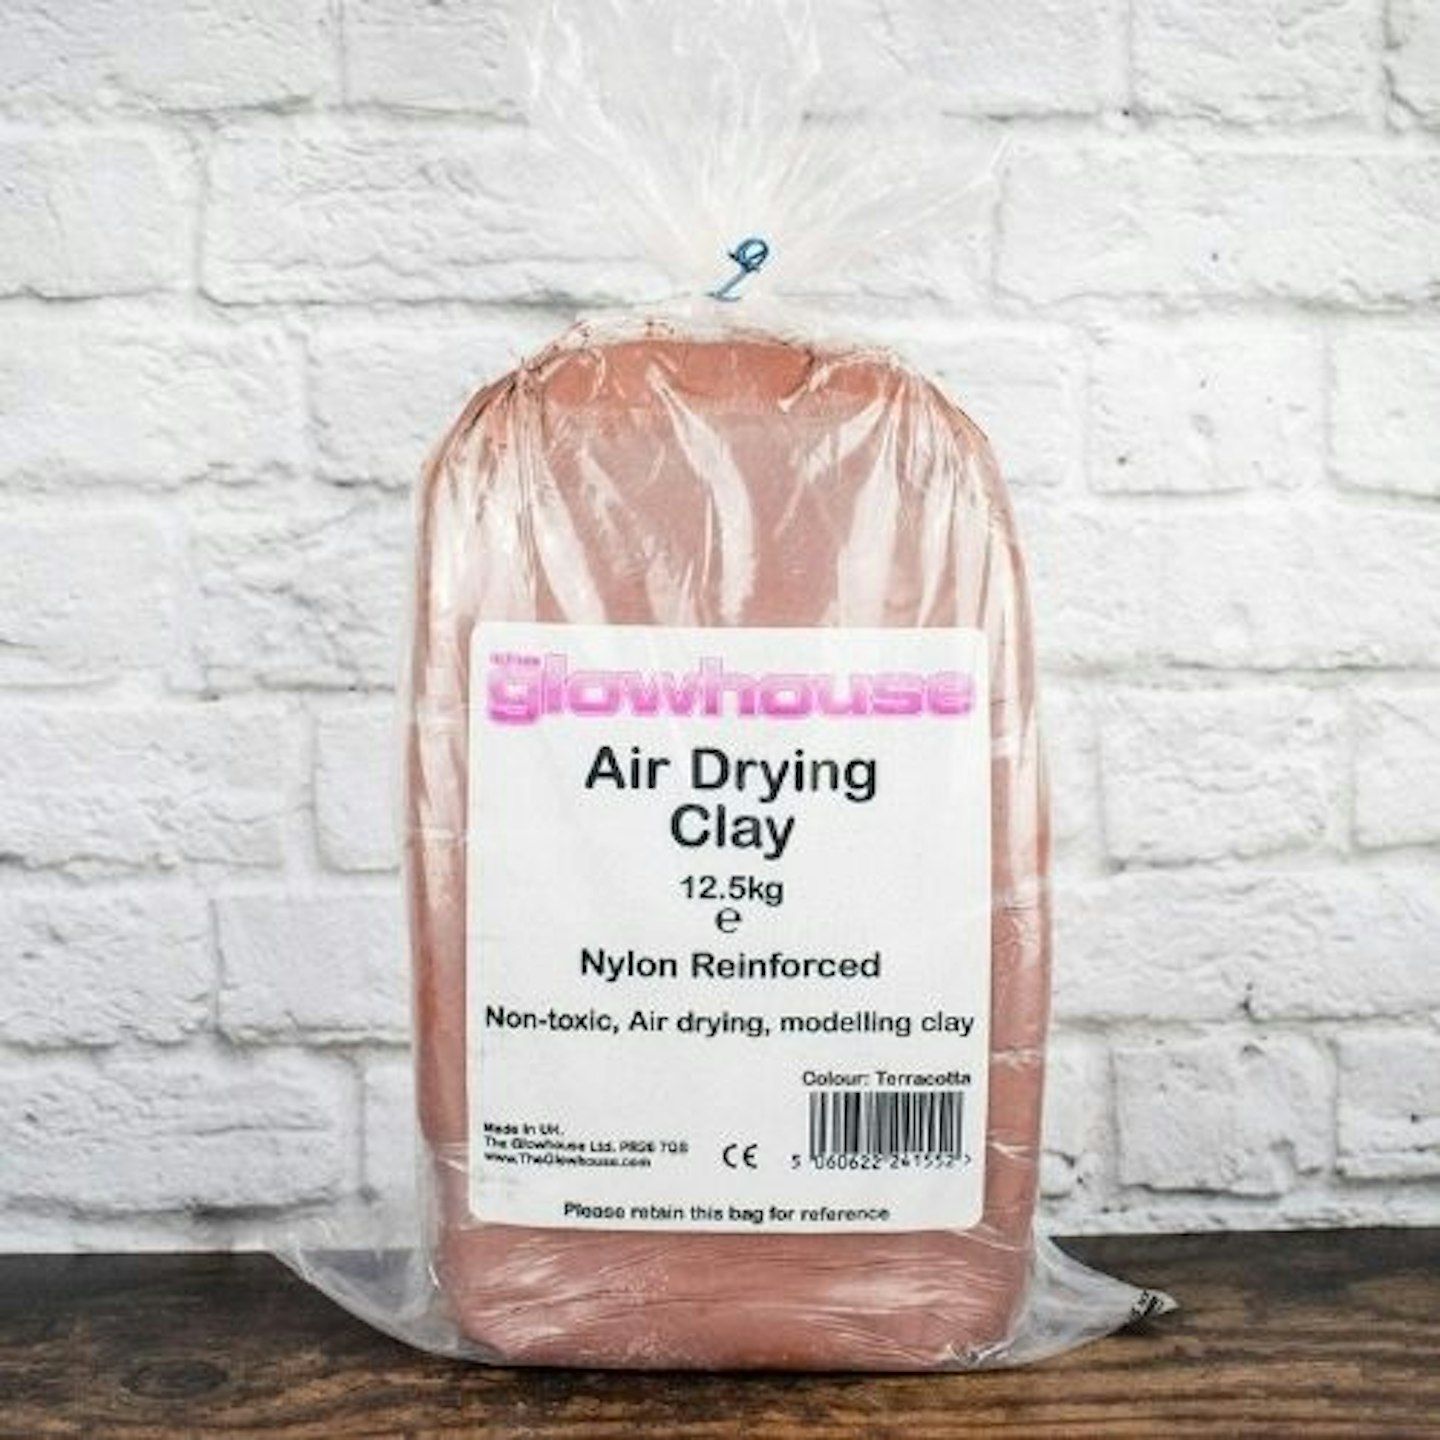 The Glowhouse Air Drying Modelling Clay Nylon Reinforced 12.5kg (Terracotta)